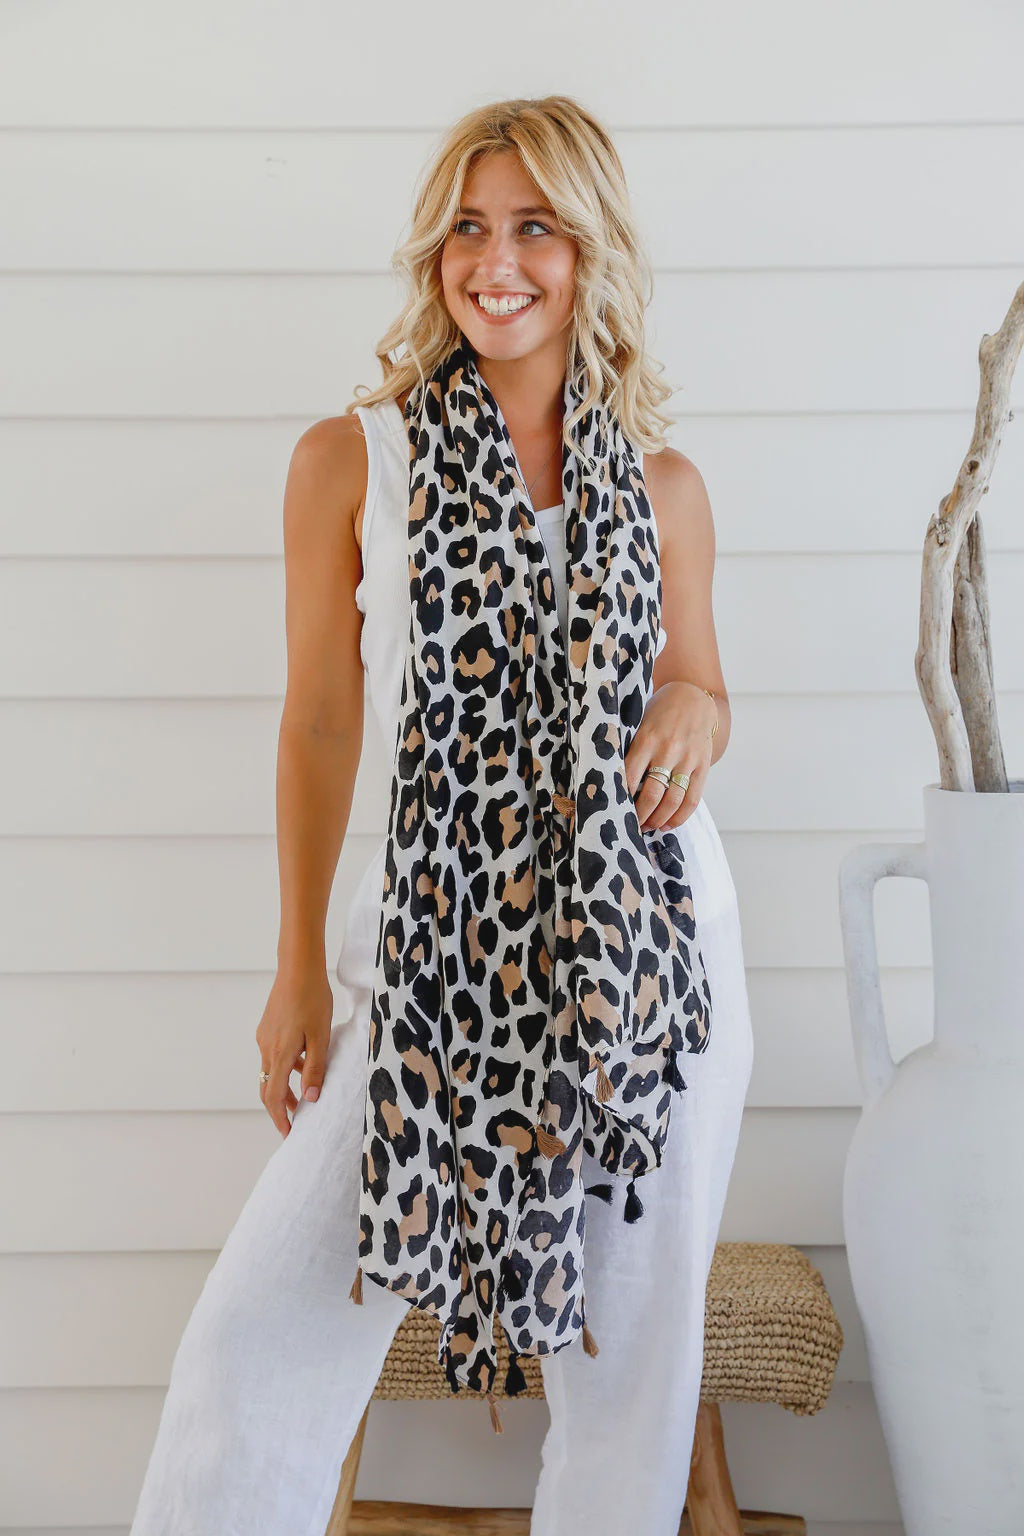 Take a walk on the wild side with our Animal Print Natural Light Scarf! Made with a lightweight material and accented with playful tassels, this scarf is perfect for adding a touch of adventure to any outfit. The perfect accessory for those who like to take risks and make a bold statement!